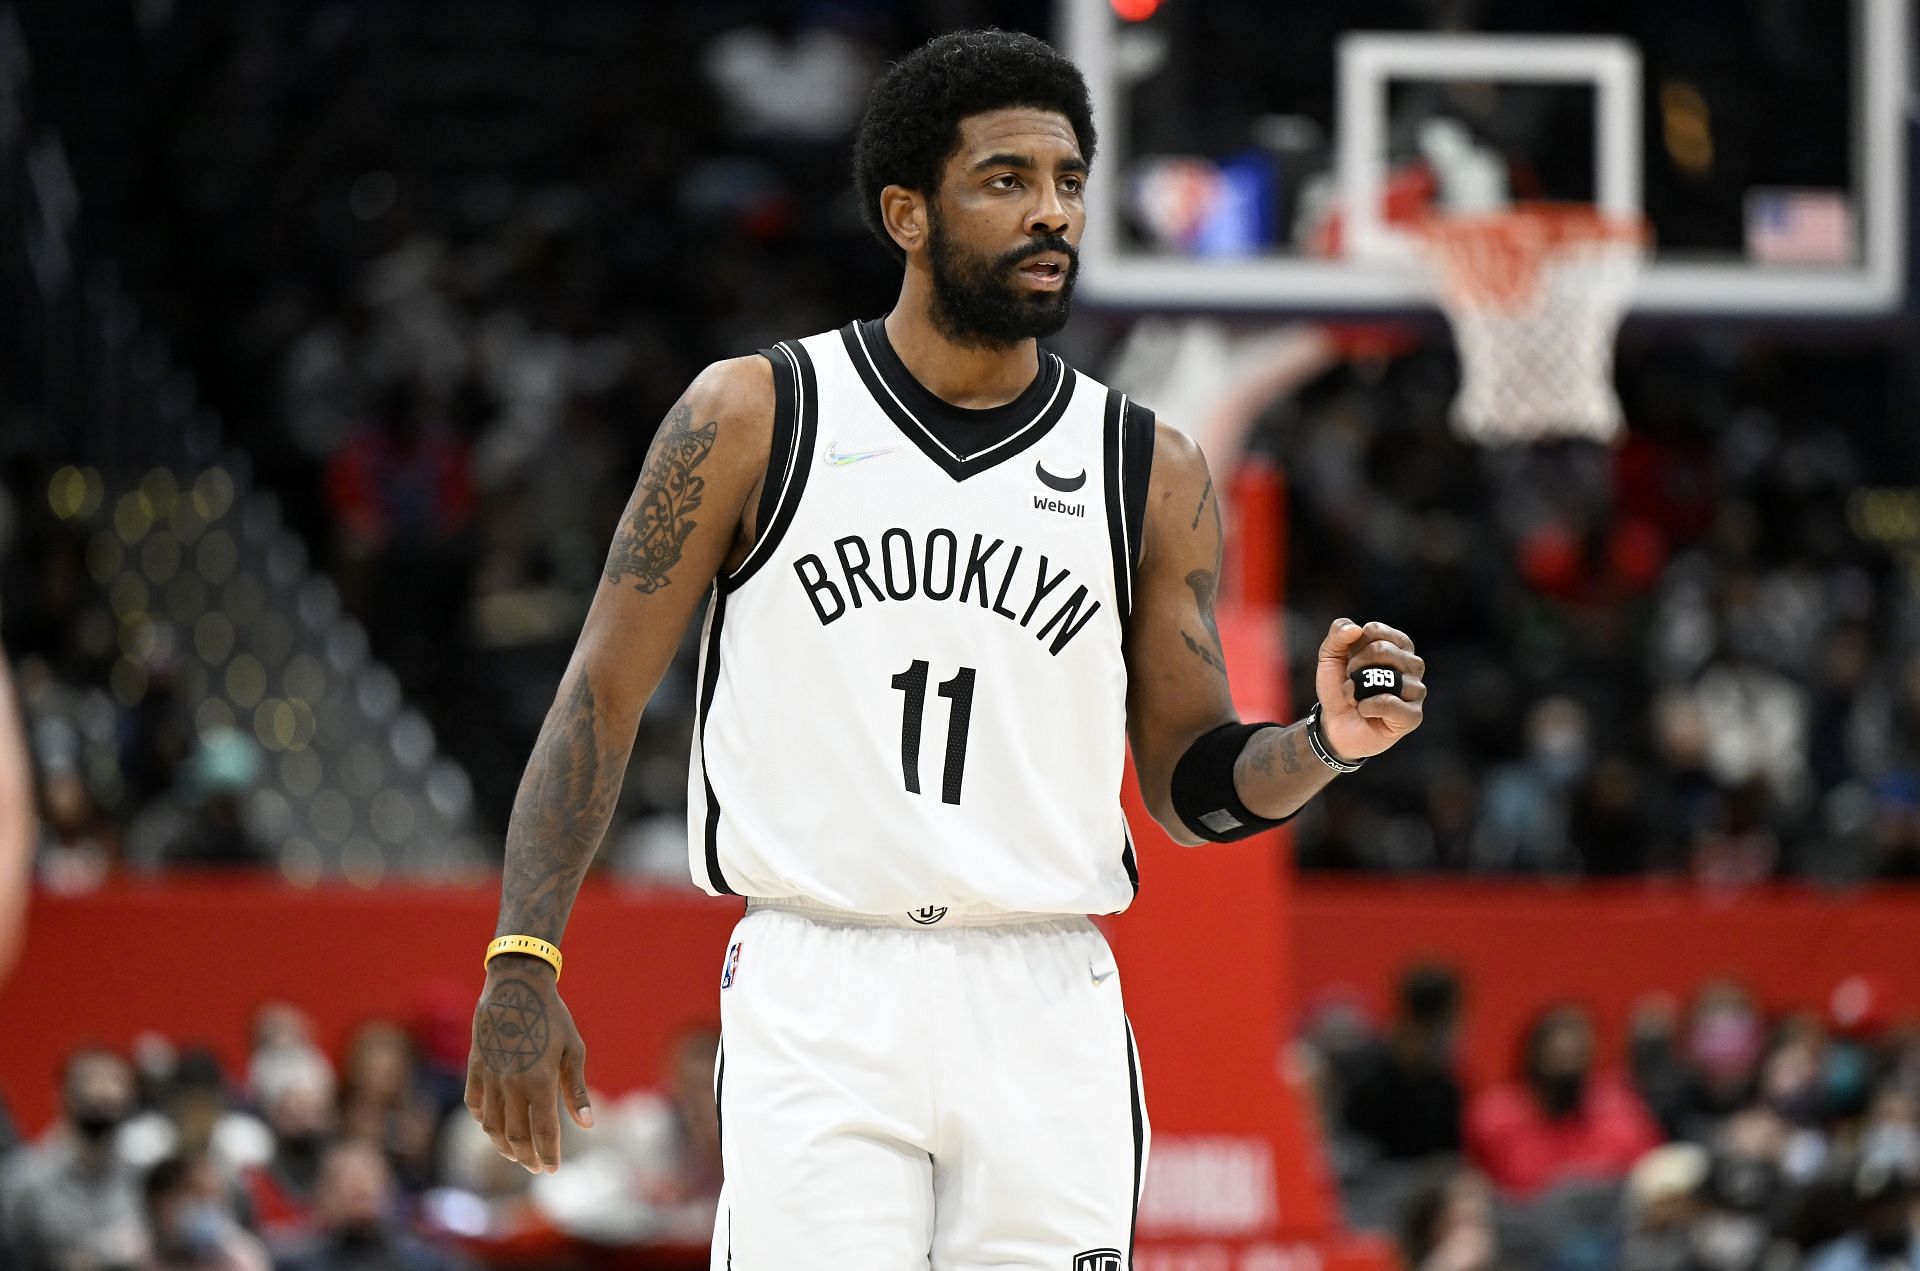 Brooklyn Nets guard Kyrie Irving is still unable to play games in New York City because of a vaccine mandate.